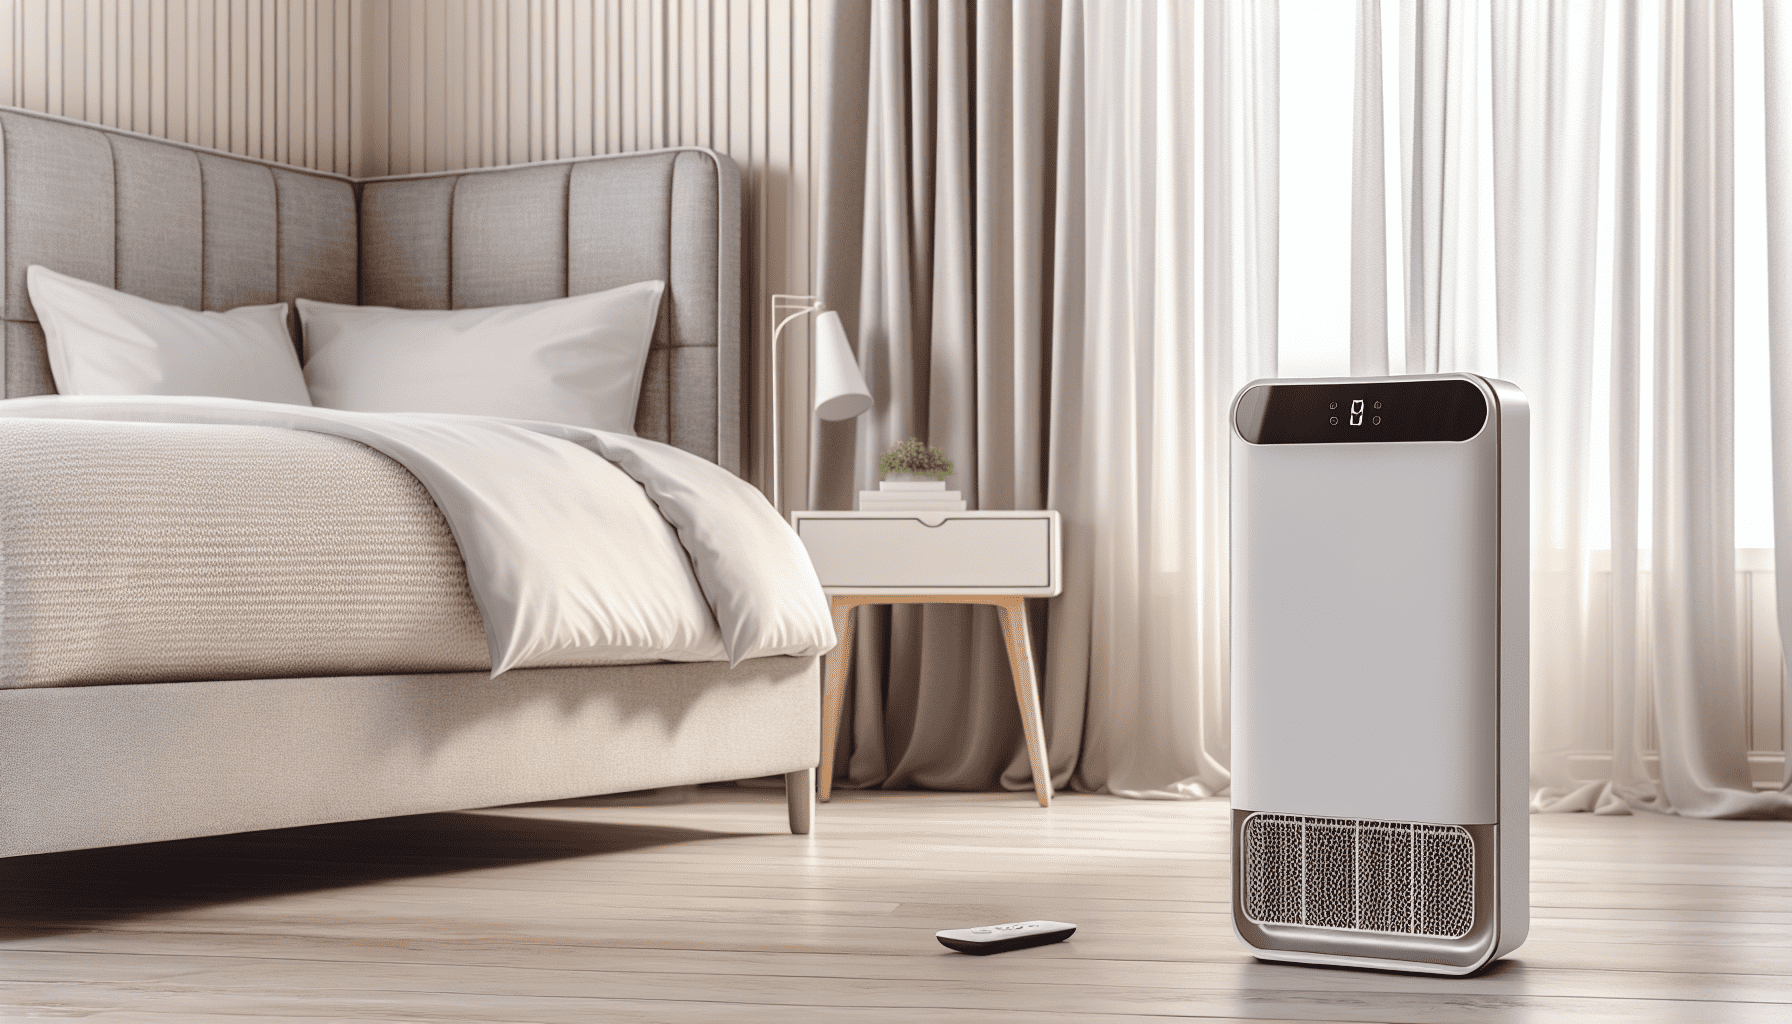 Winix Air Purifier with remote control in a bedroom